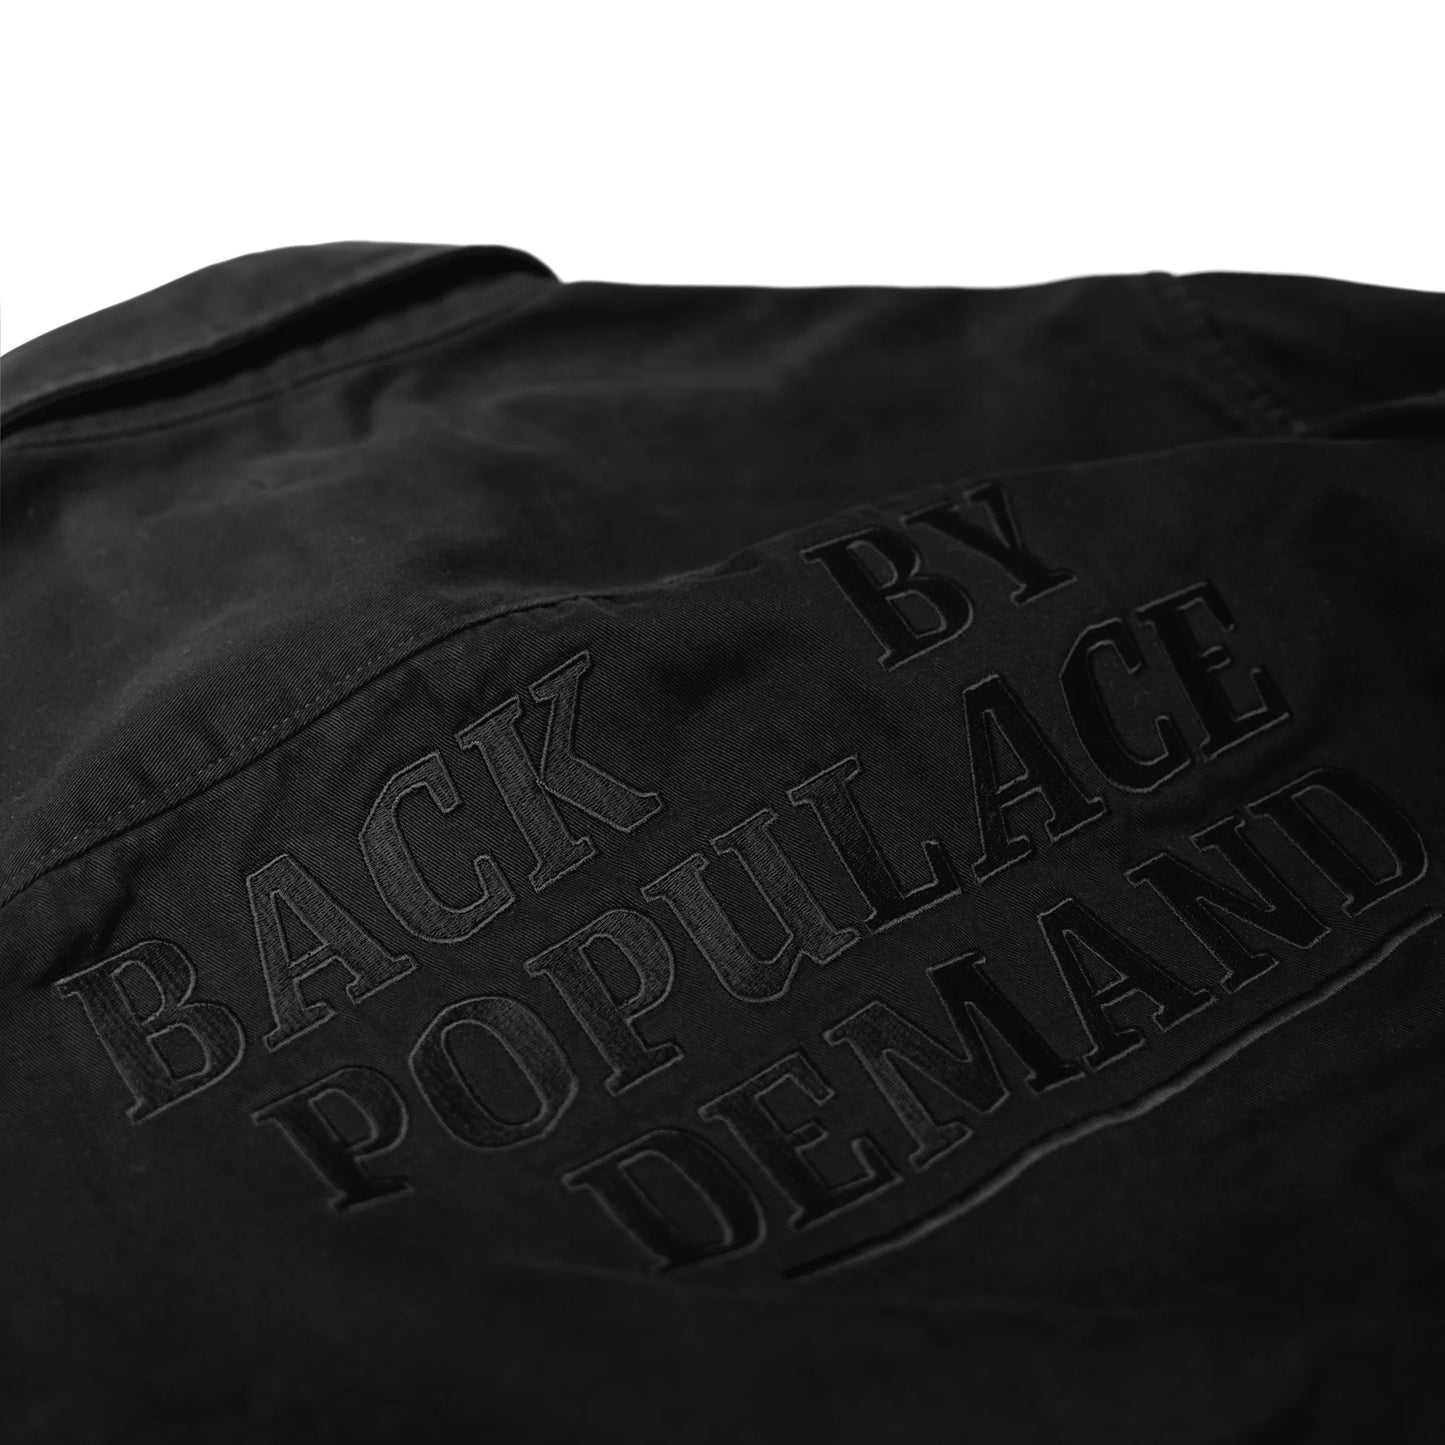 Black canvas overshirt embroidery close-up